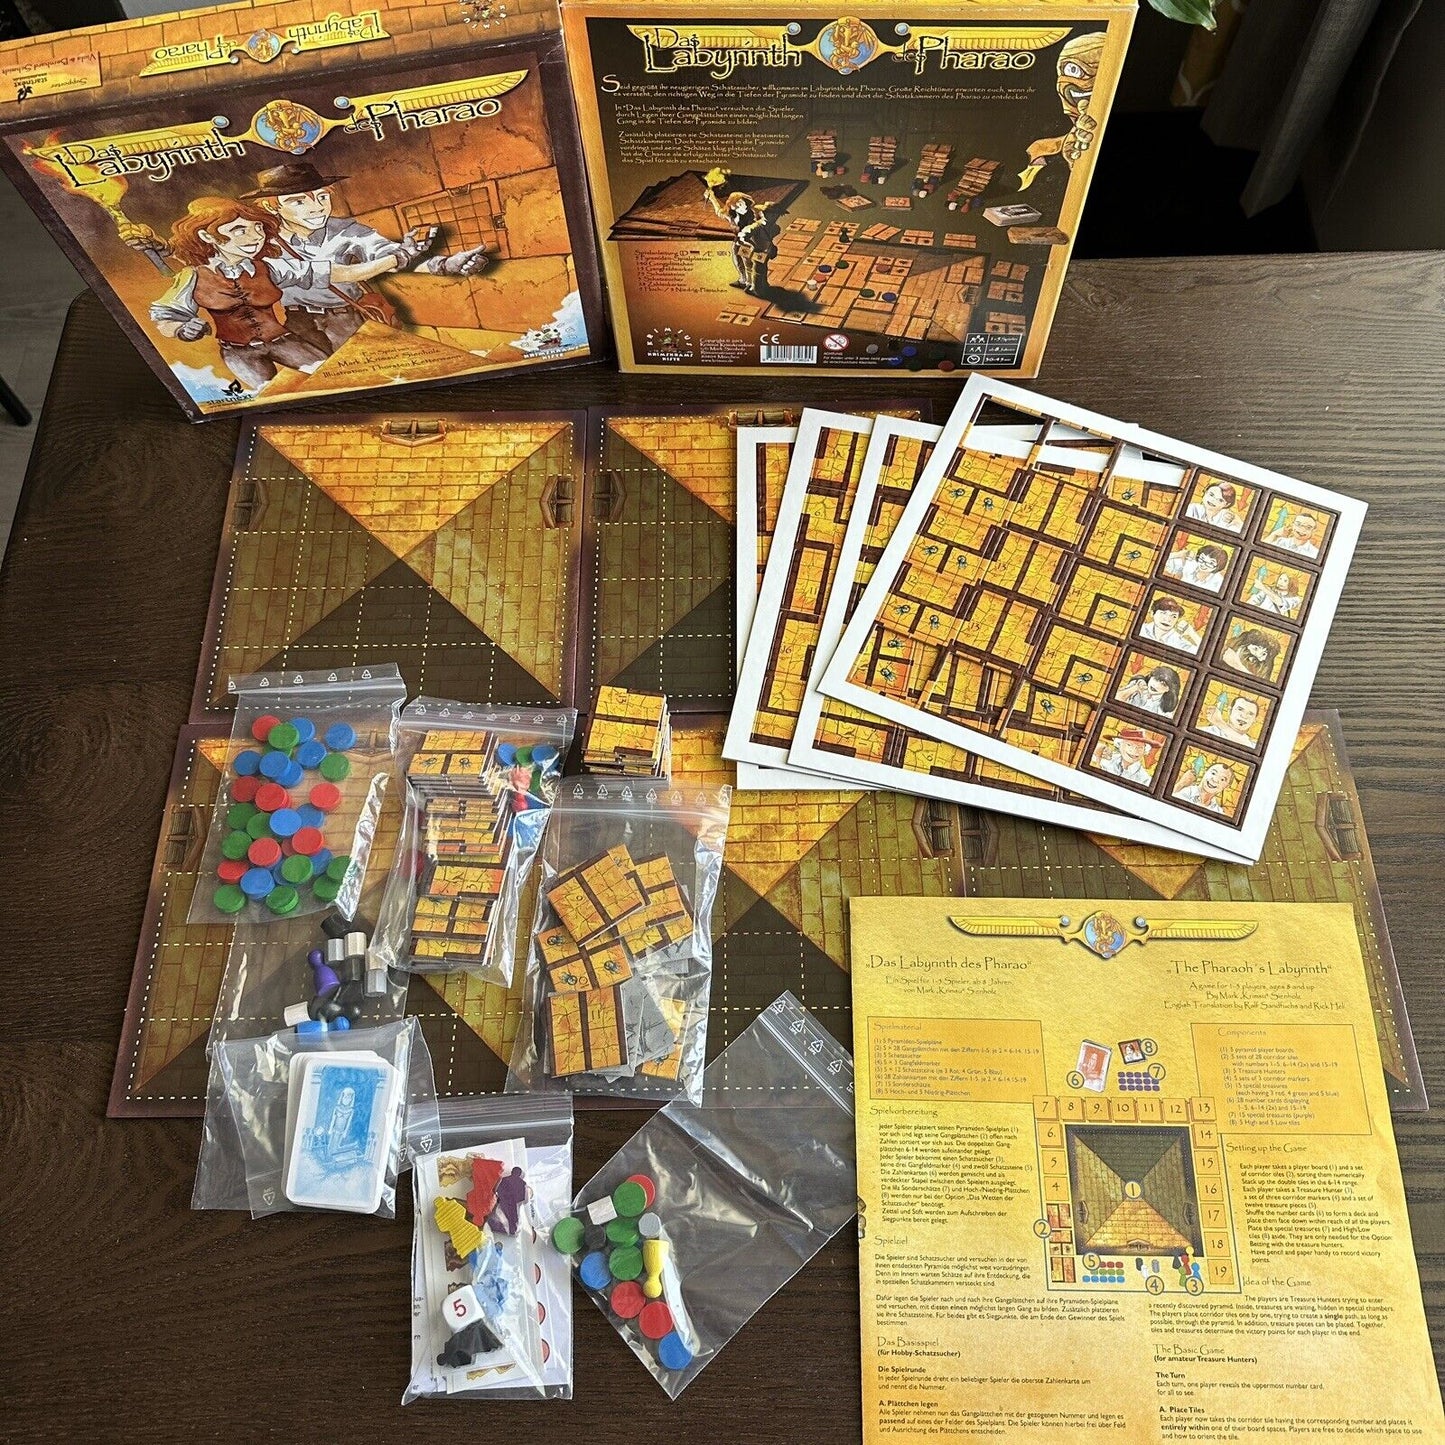 Das Labyrinth Des Pharao Board Game Labyrinth Of The Pharaoh Signed Essen 2013